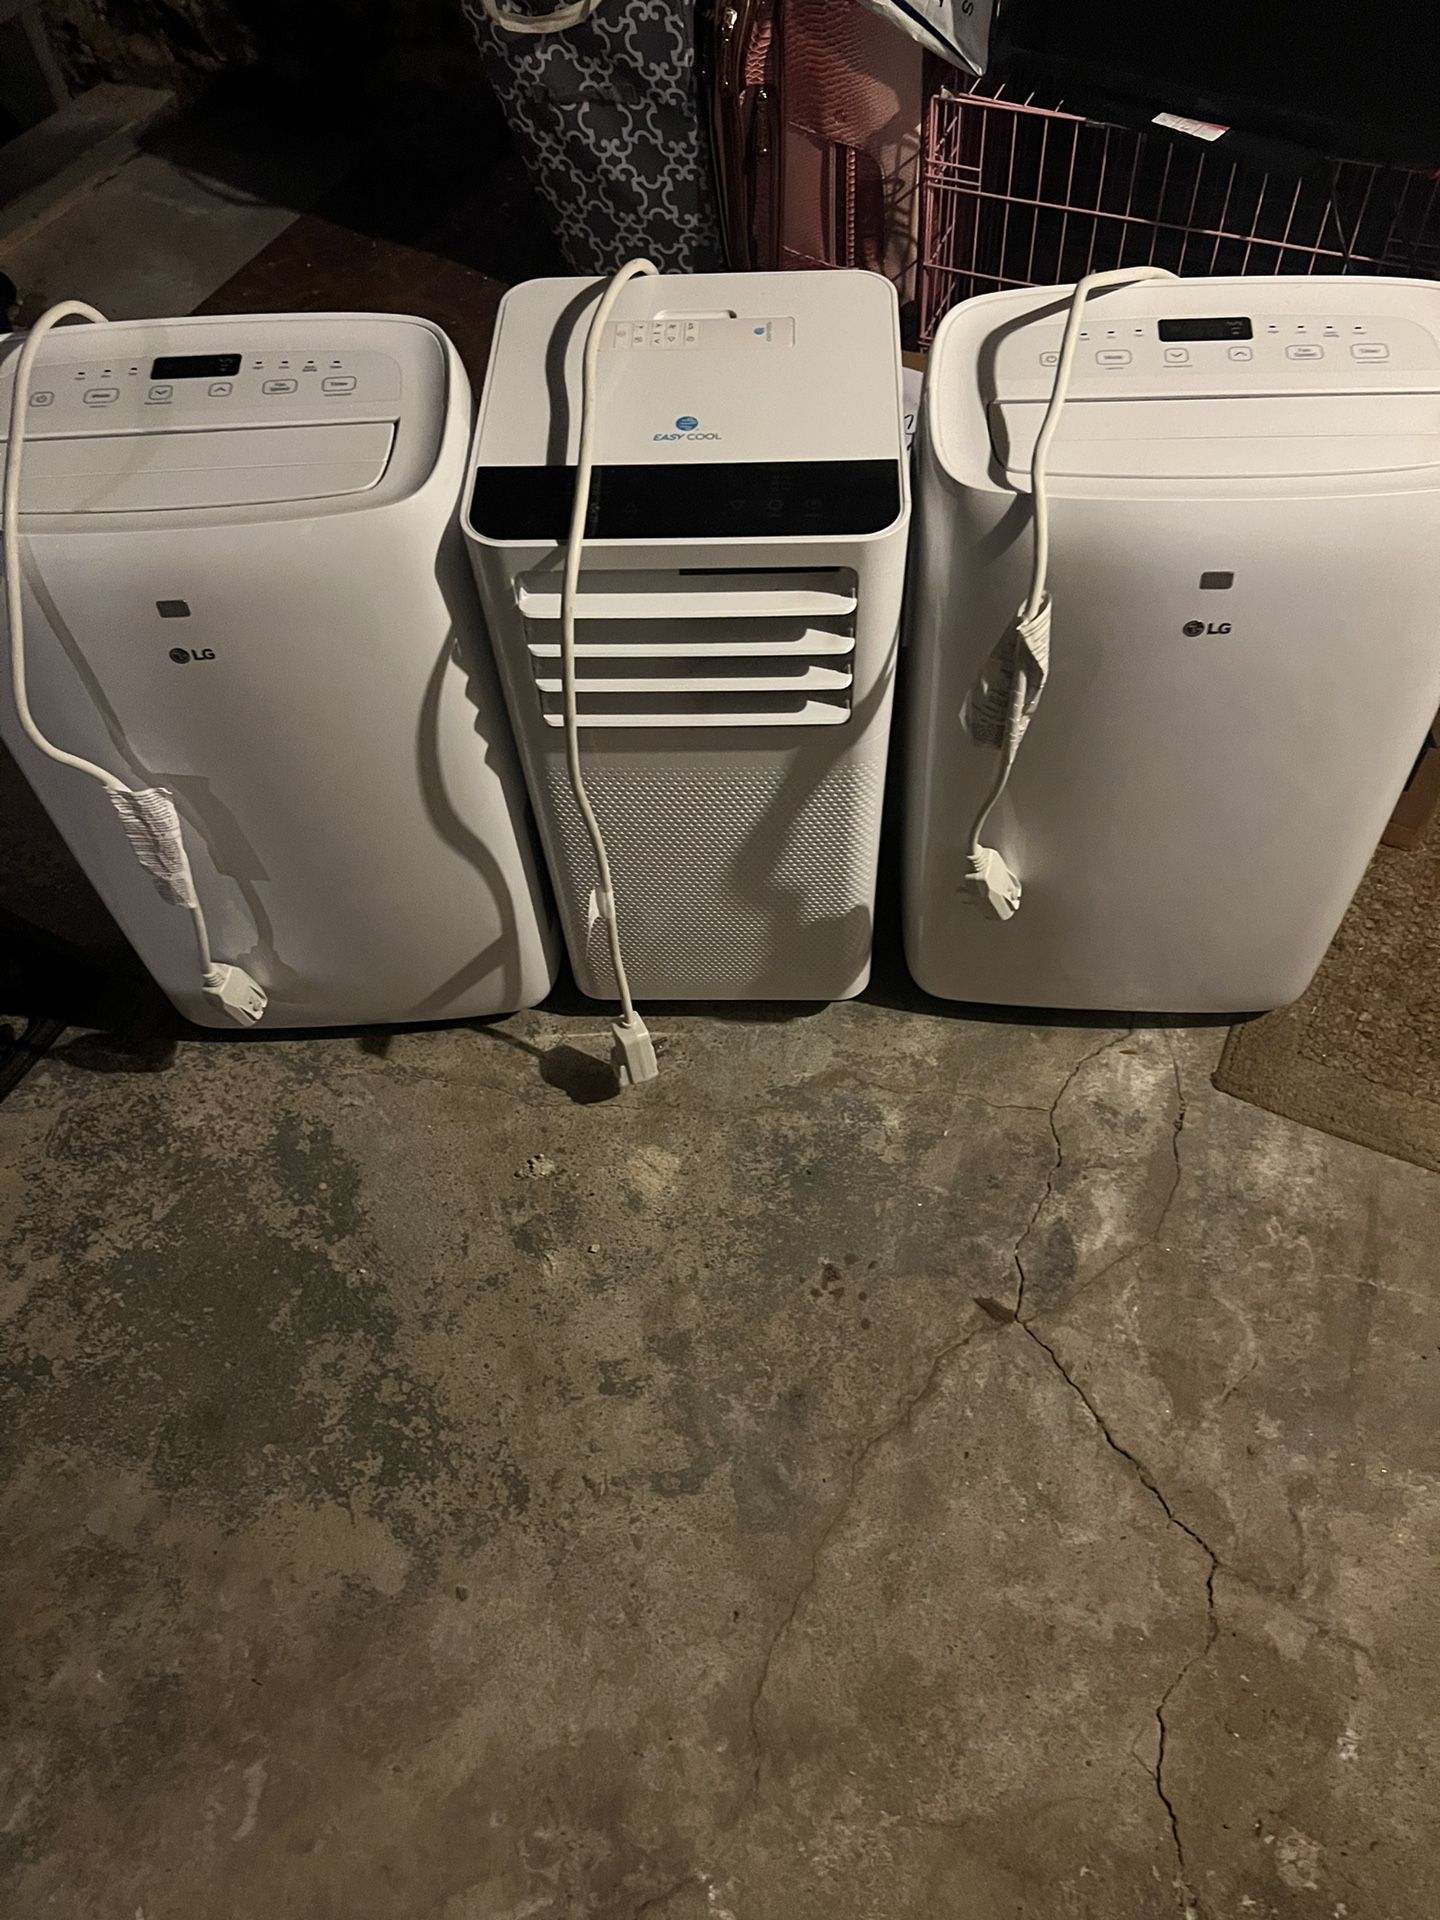 Portable Air Conditioners 